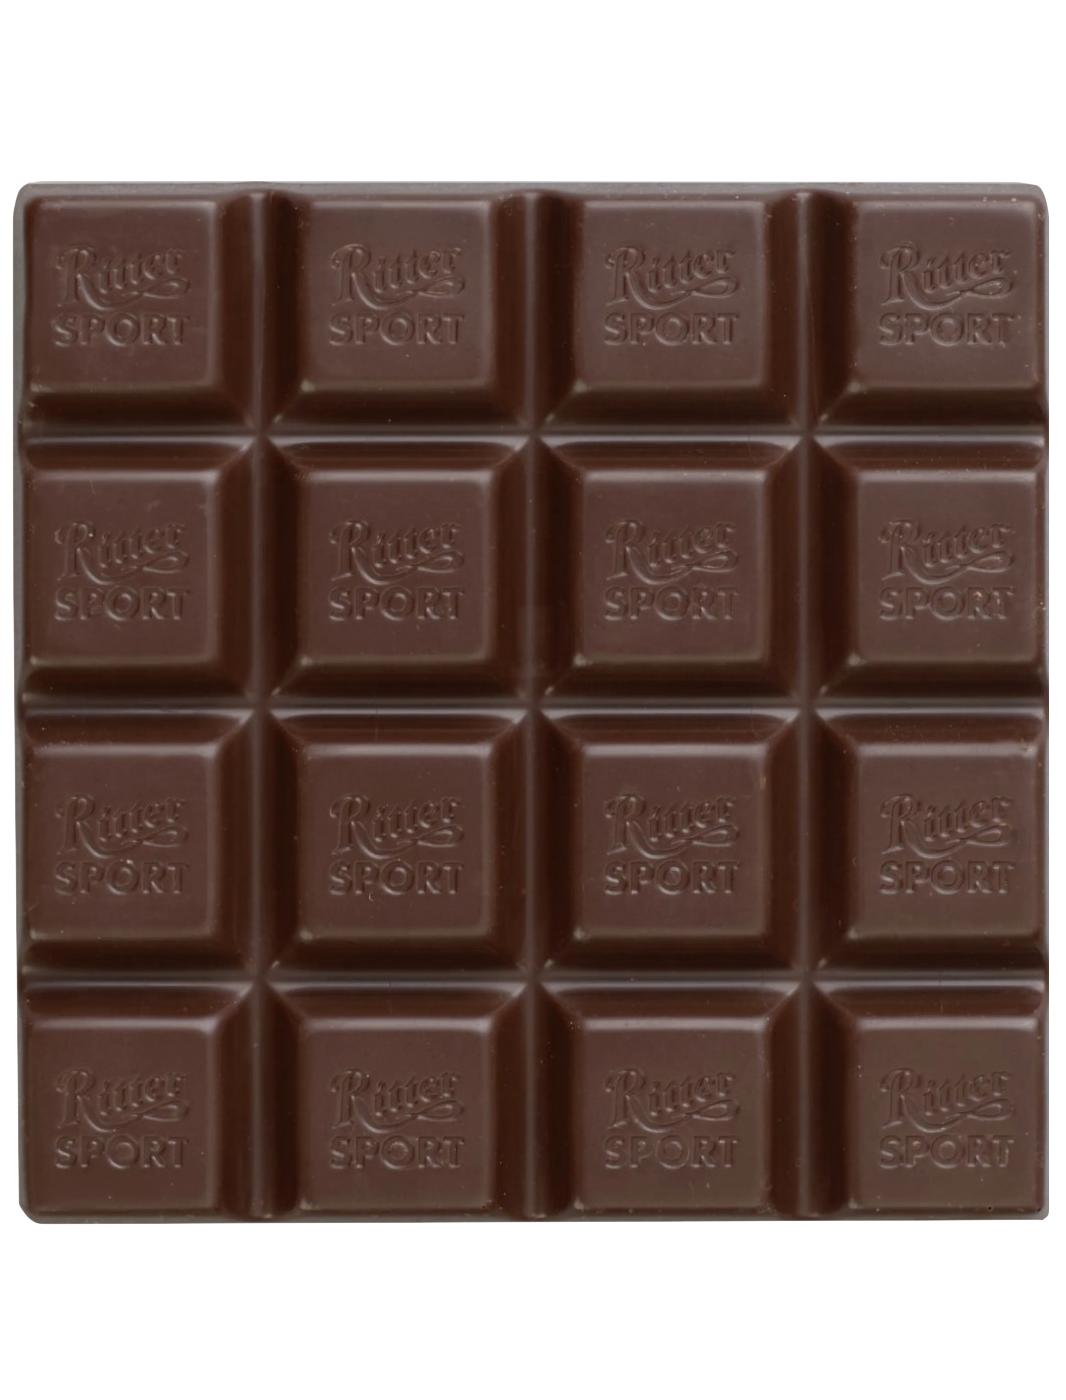 Ritter Sport Dark Chocolate with Whole Almonds; image 3 of 3